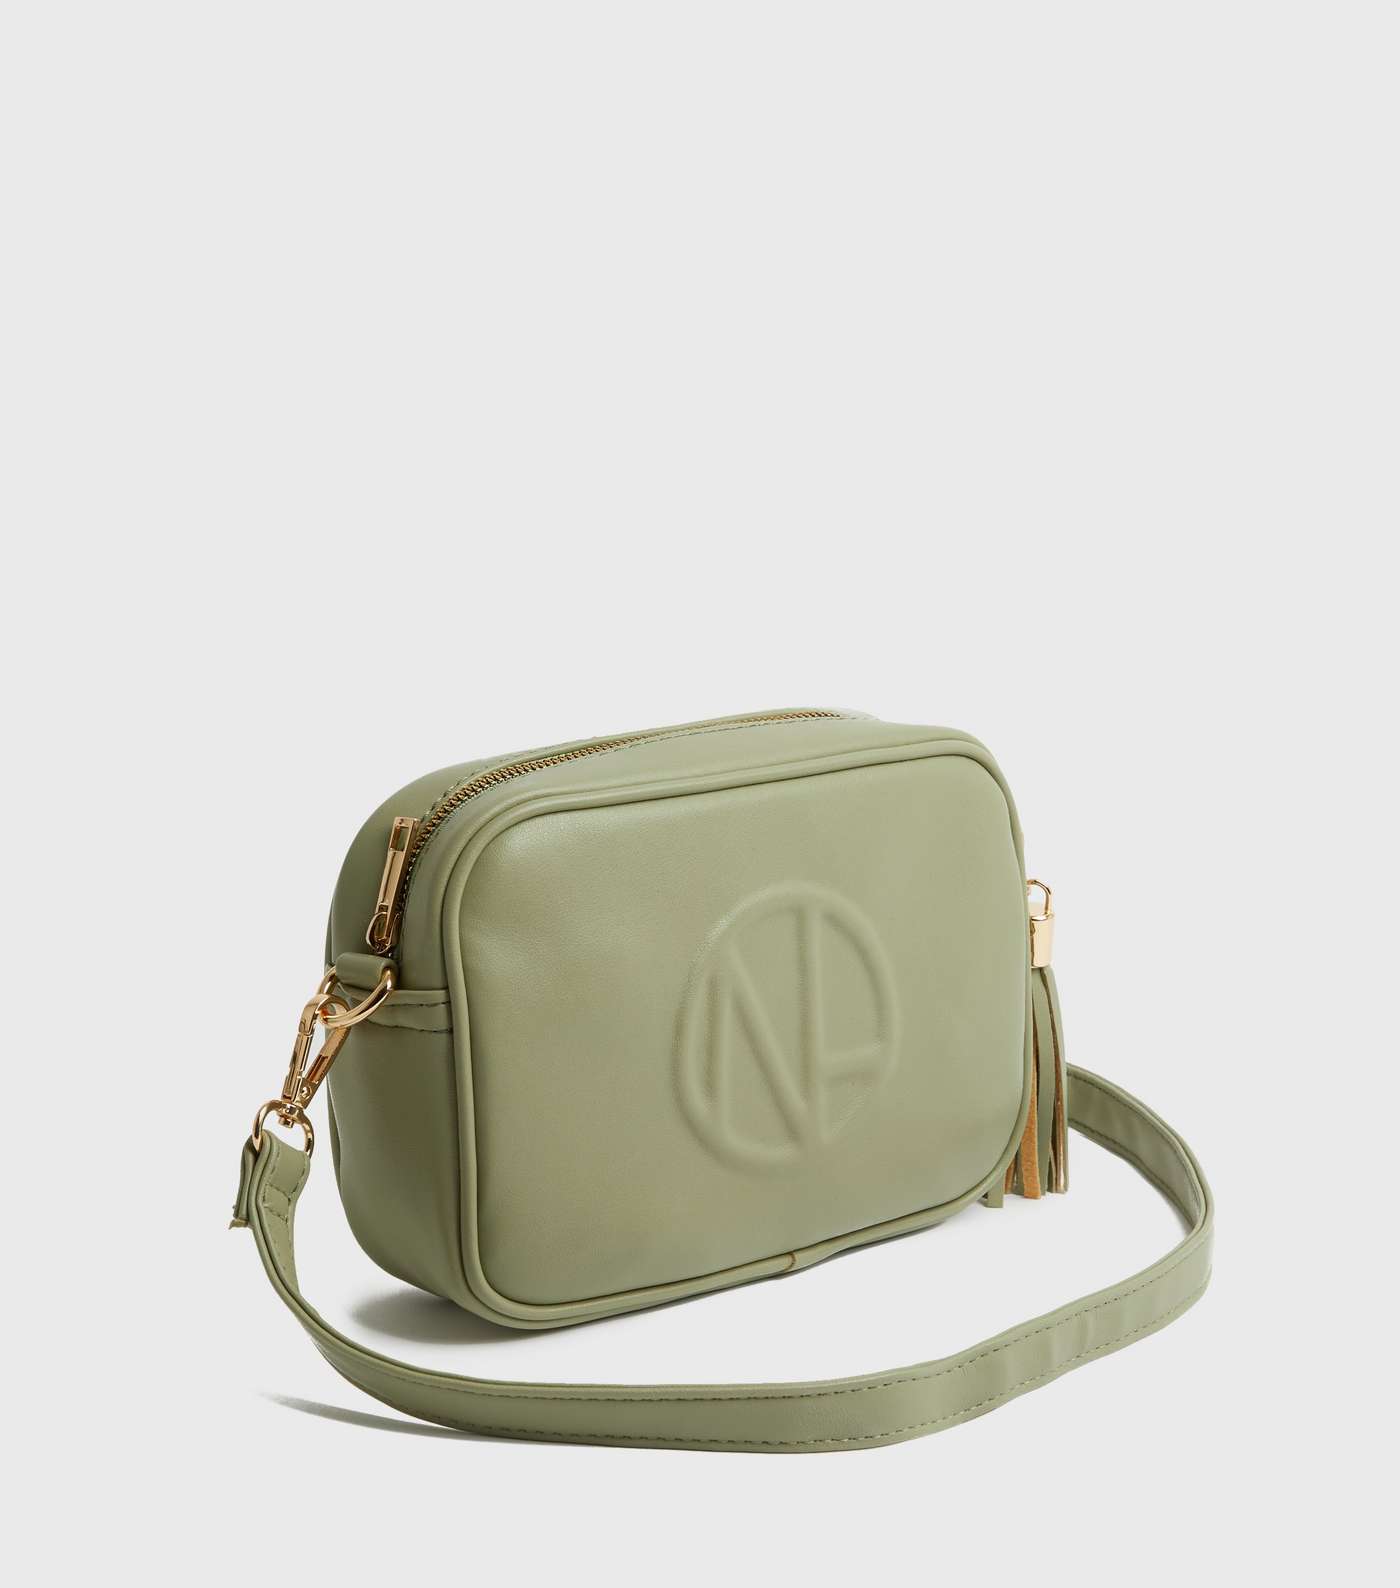 Olive Leather-Look Embossed Cross Body Bag Image 3